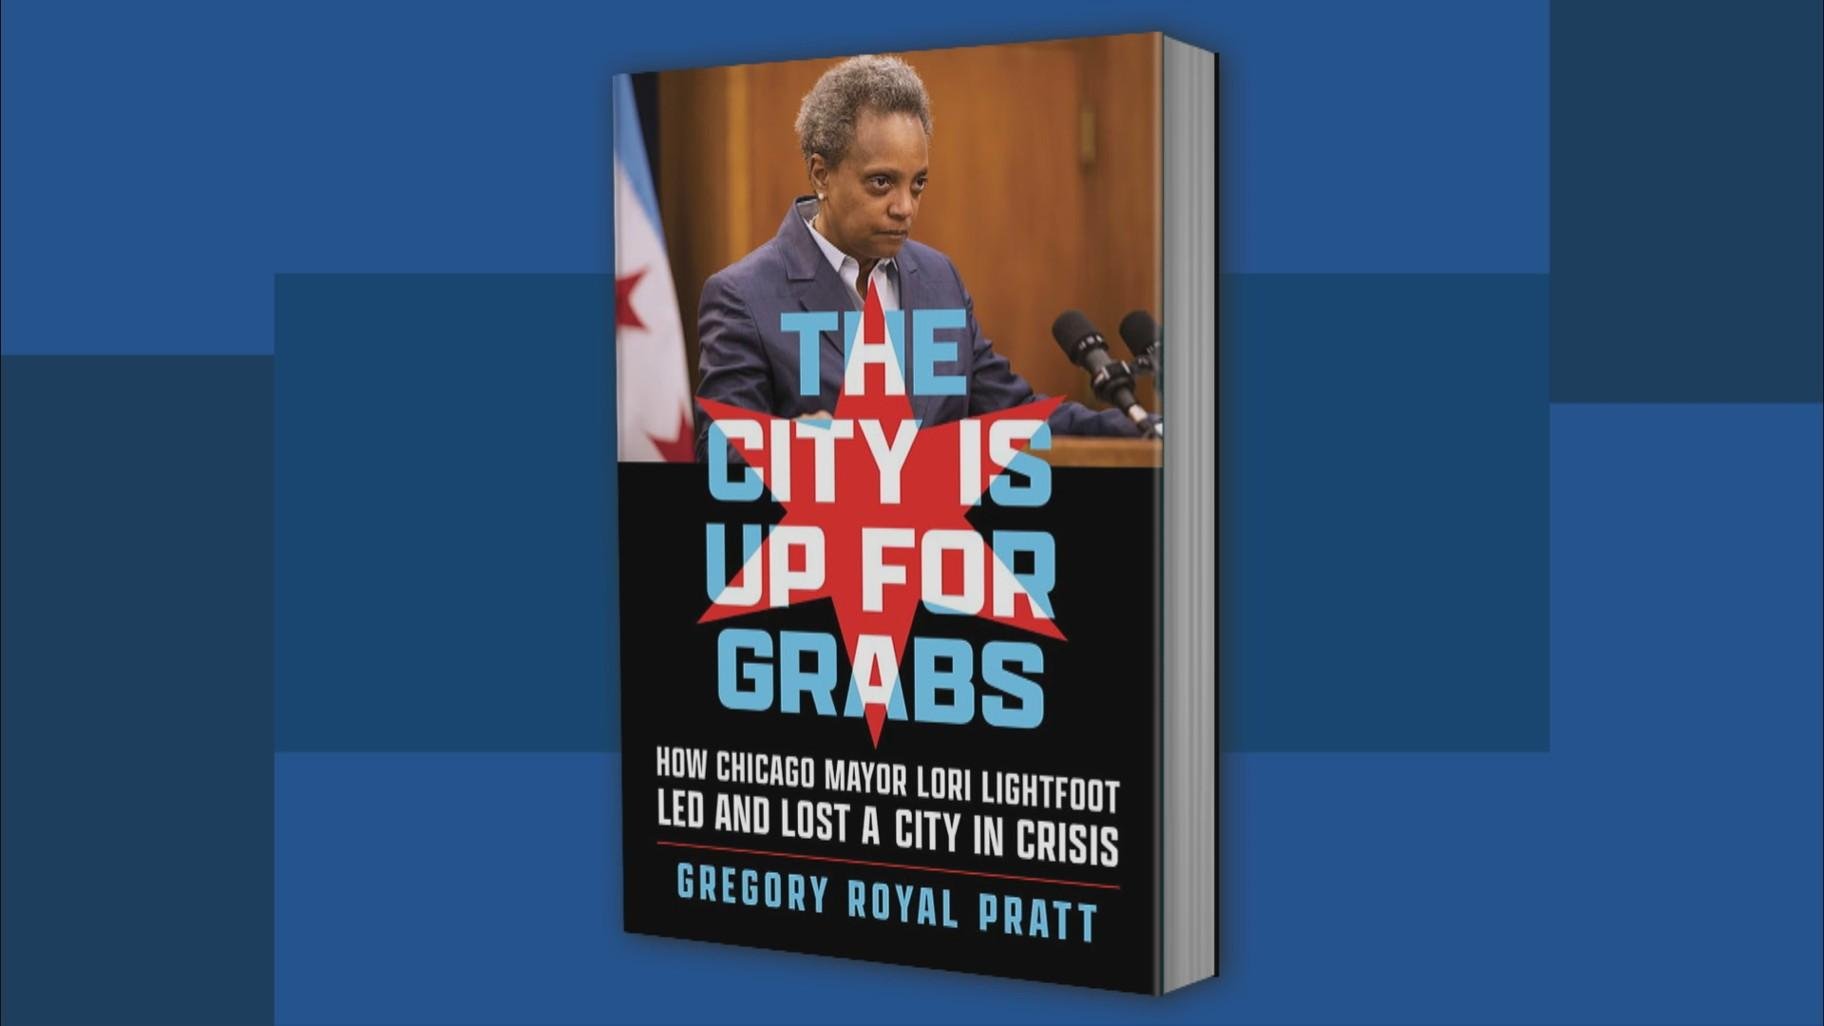 The City is Up for Grabs: How Chicago Mayor Lori Lightfoot Led and Lost a City in Crisis by Gregory Royal Pratt. (Chicago Review Press)